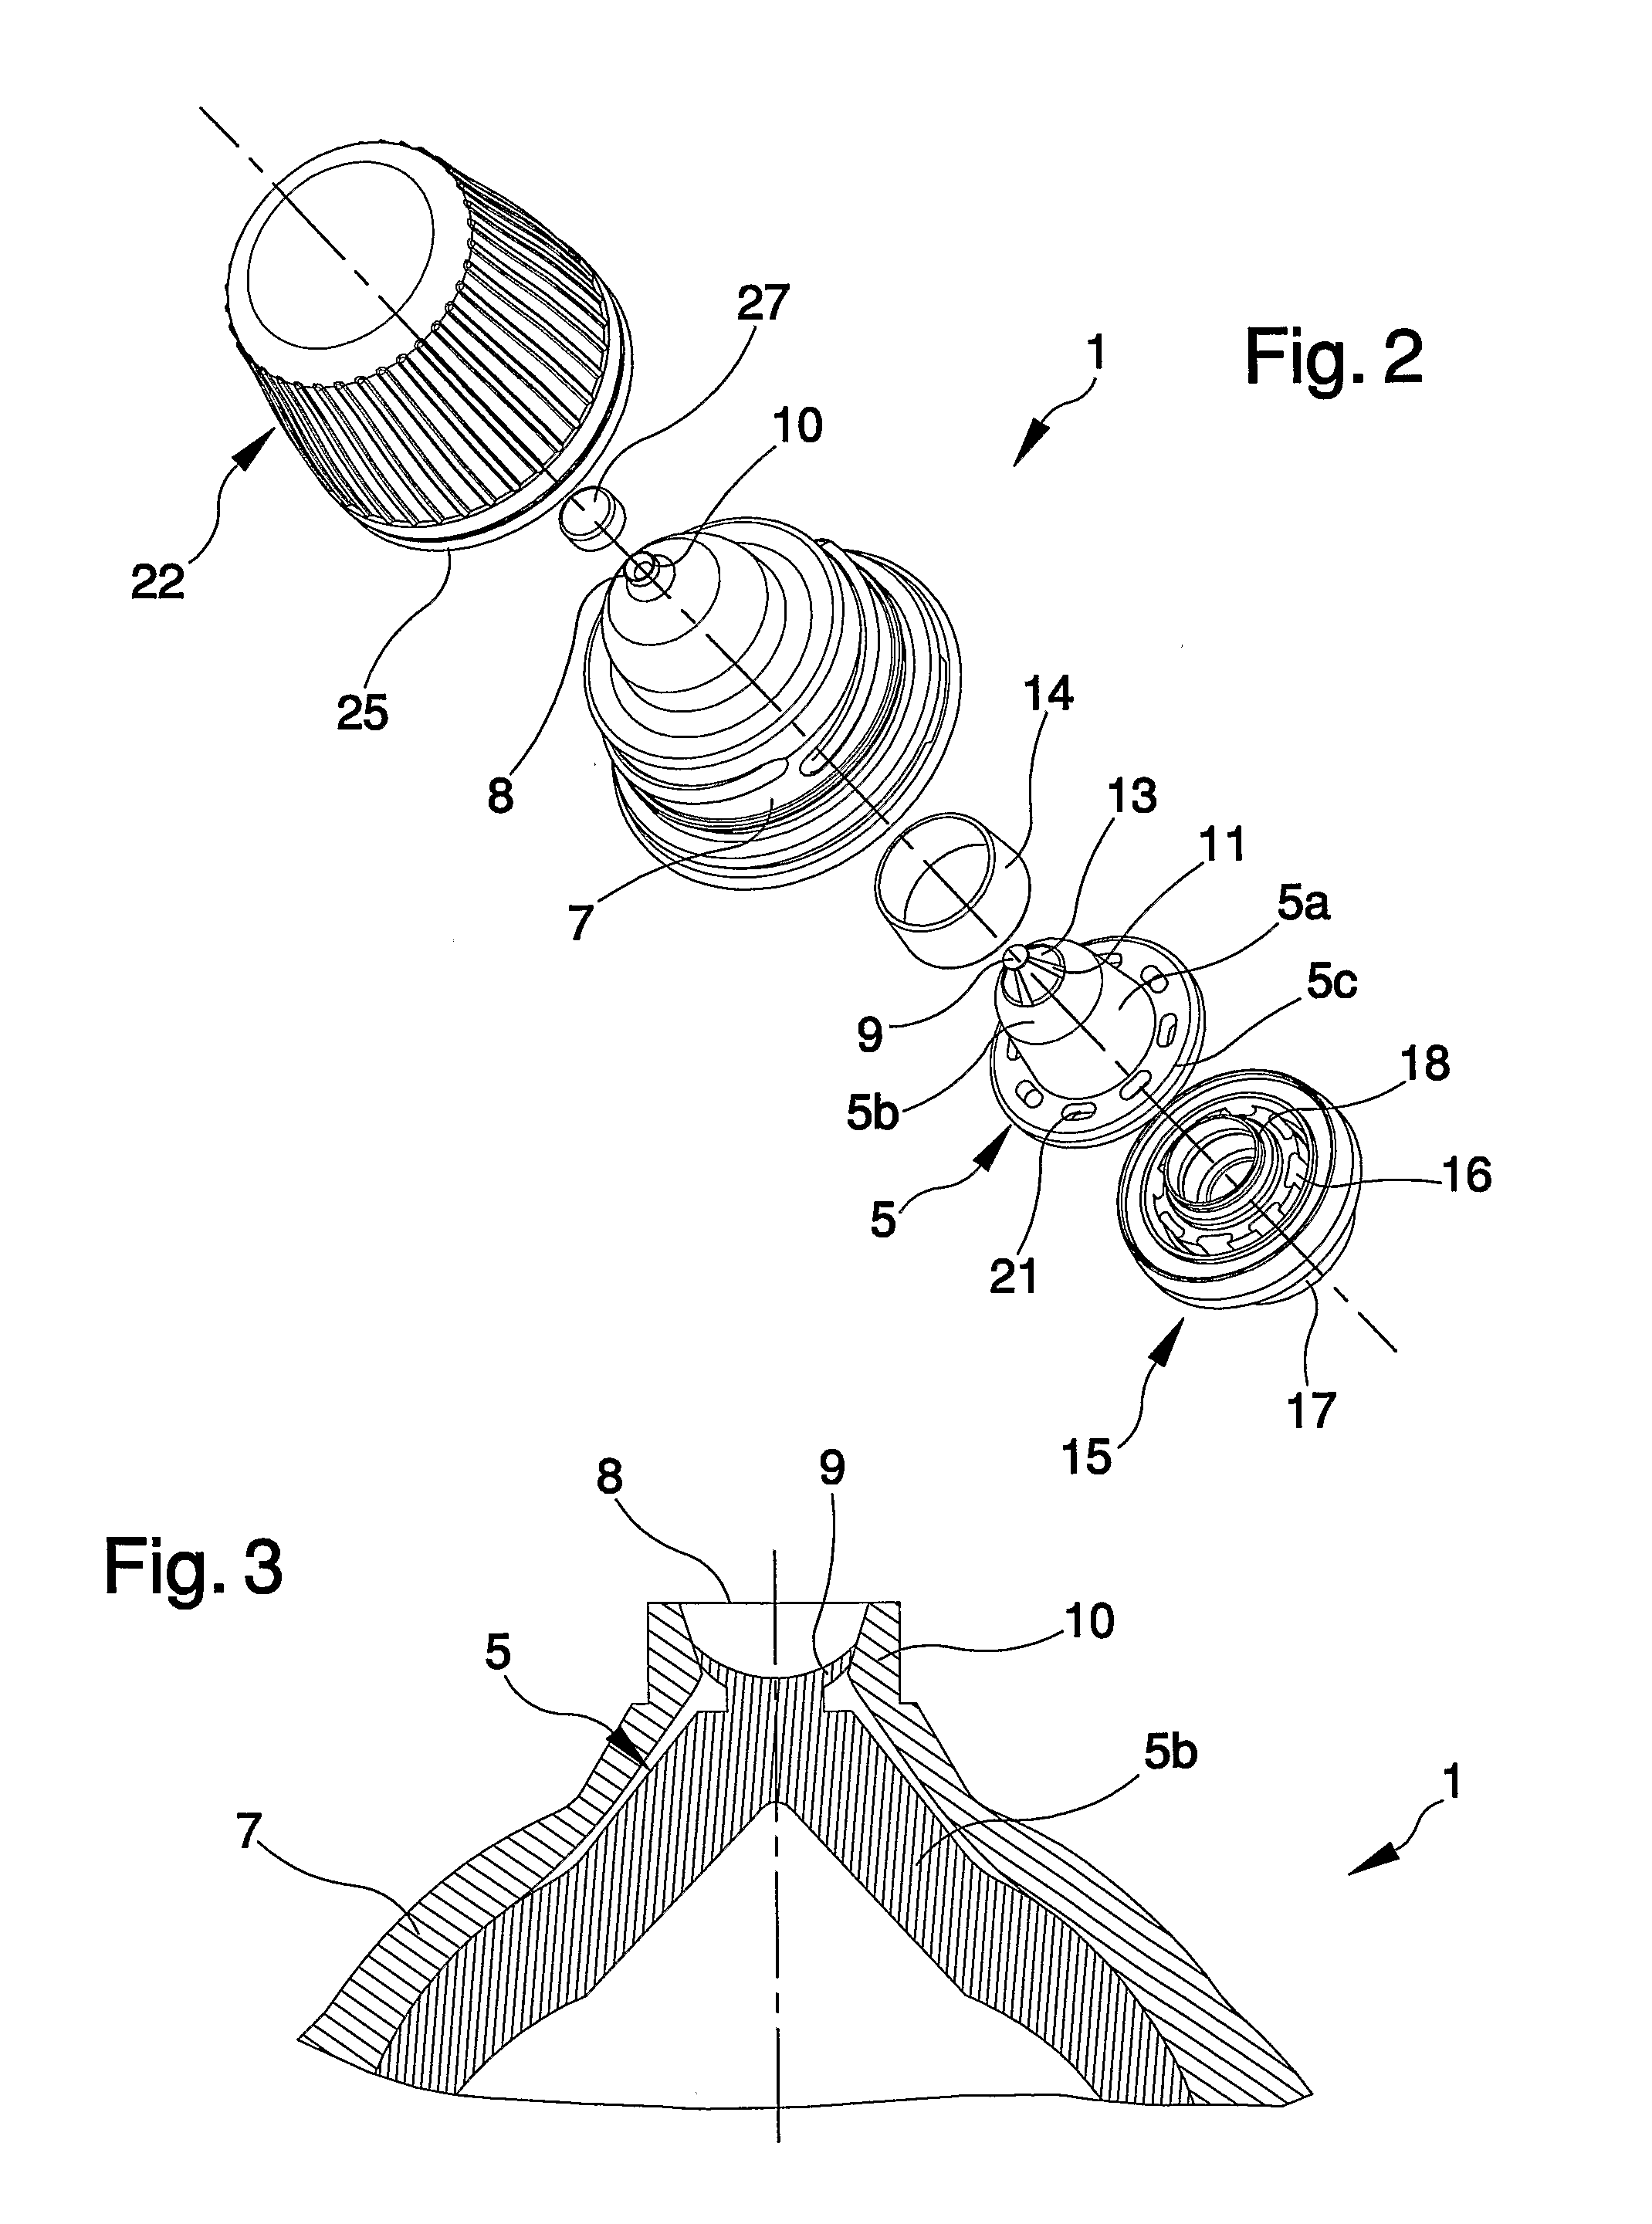 Bottle for containing fluids, particularly for pharmaceutical products or the like